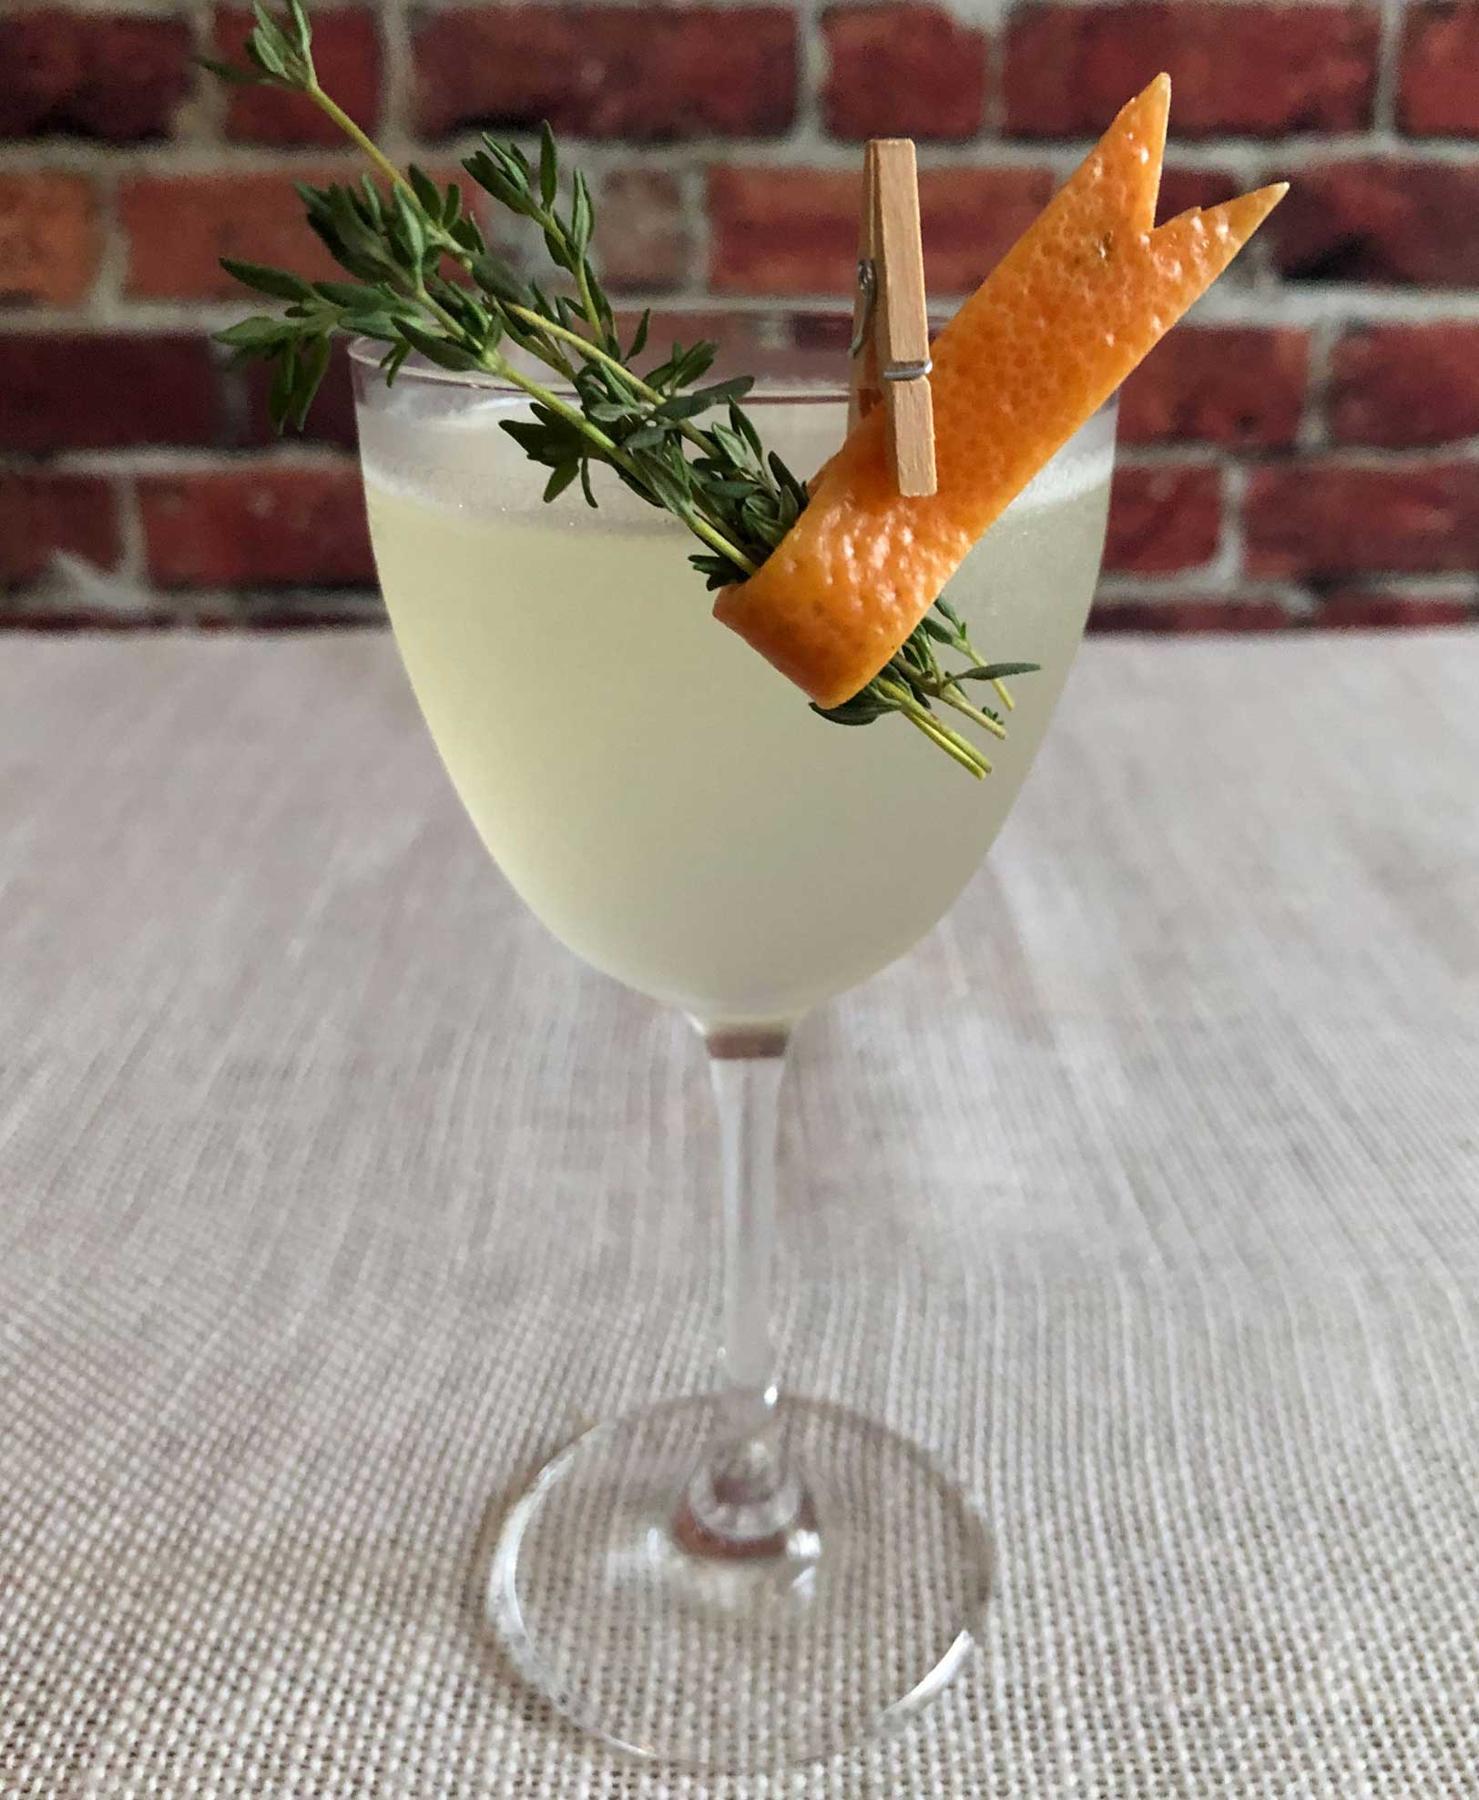 An example of the Hemingway in Europe, the mixed drink (drink), by Patrick Williams, Punch Bowl Social, Denver, featuring Batavia Arrack van Oosten, grapefruit oleo-saccharum, lime juice, maraschino liqueur, grapefruit twist, and sprig of thyme; photo by Lee Edwards